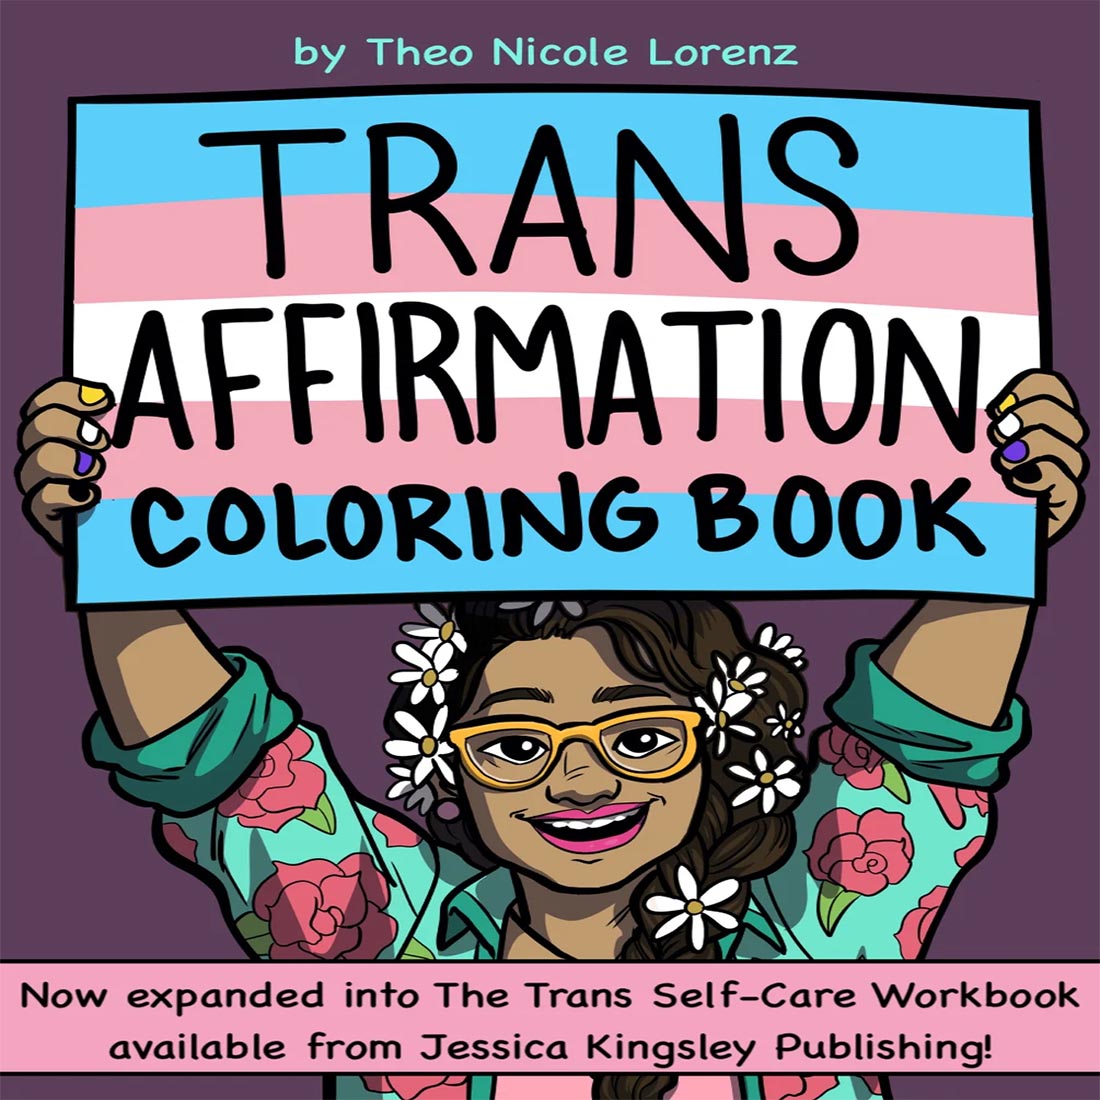 The Trans Affirmation Coloring Book preview image.